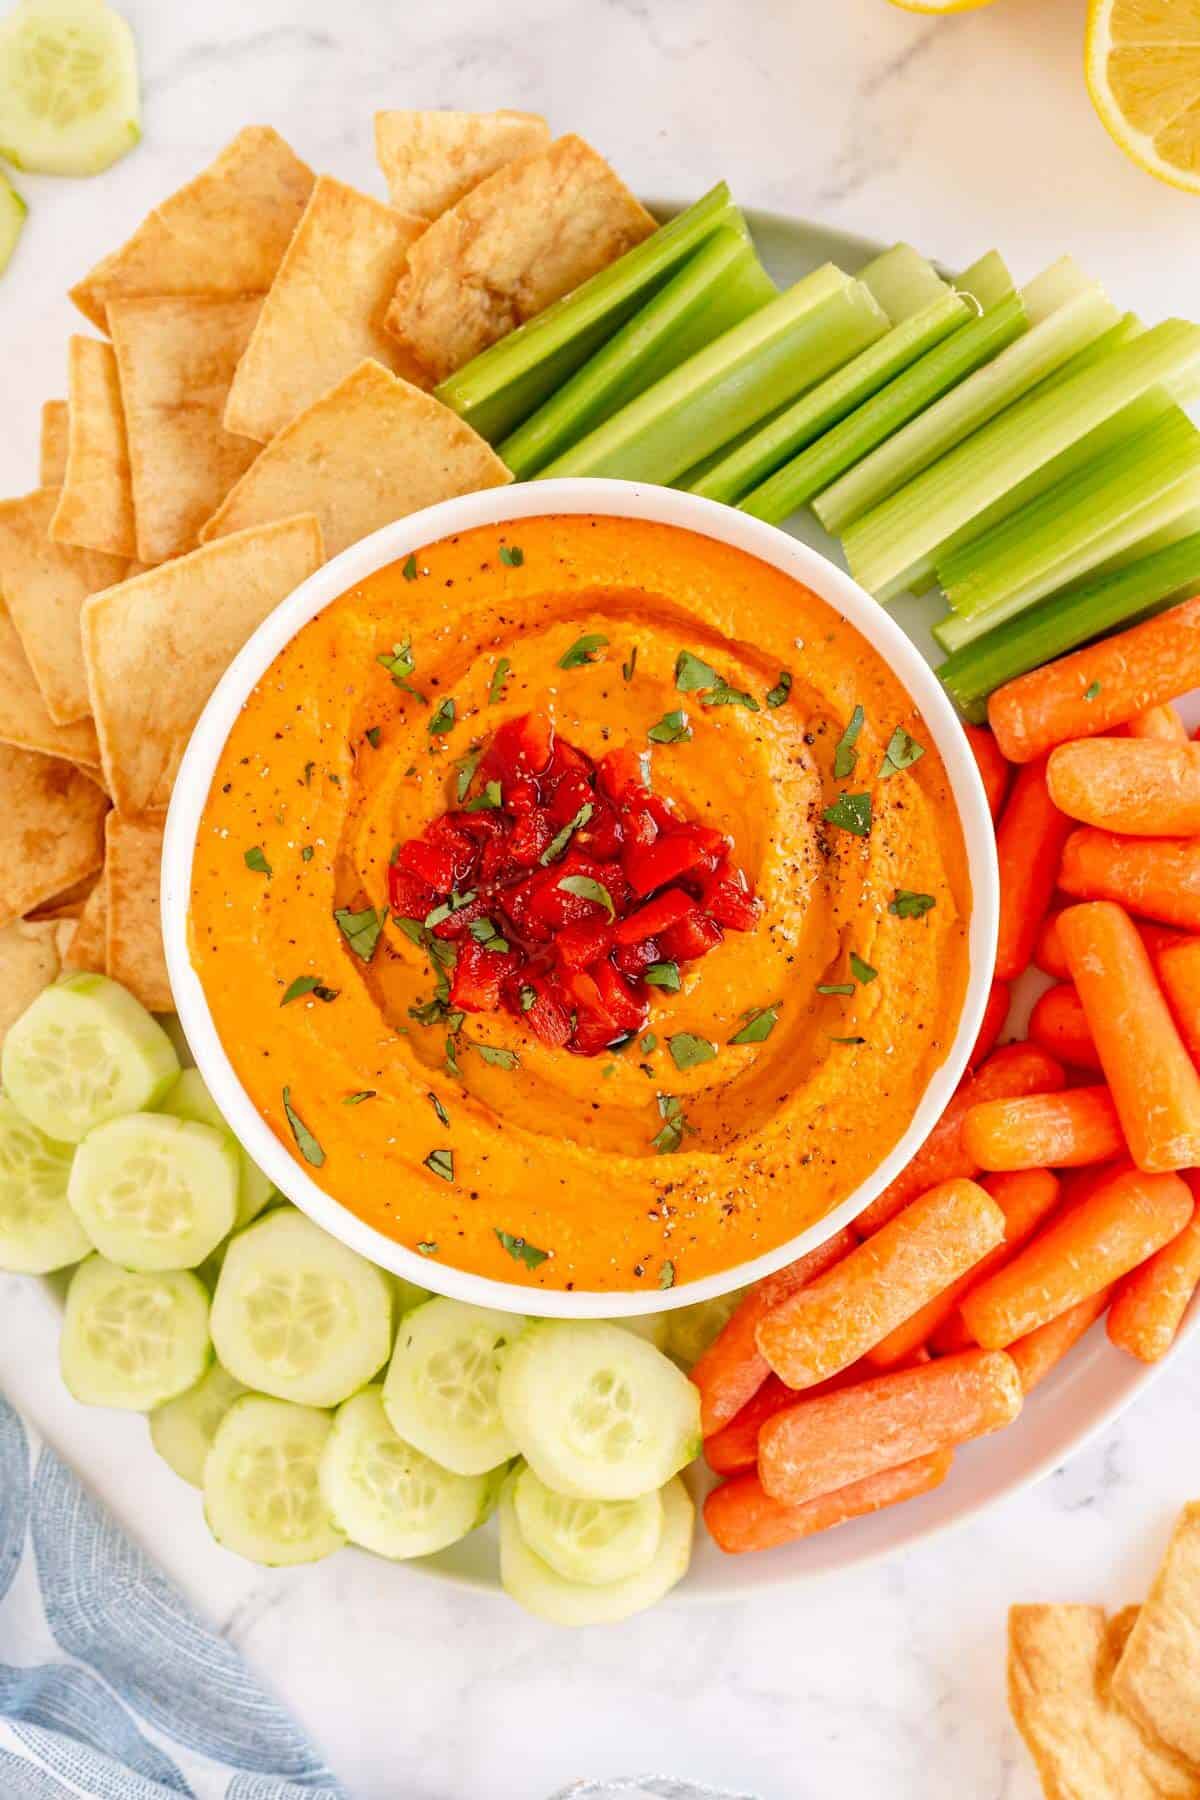 hummus with pita, carrots, celery and cucumbers